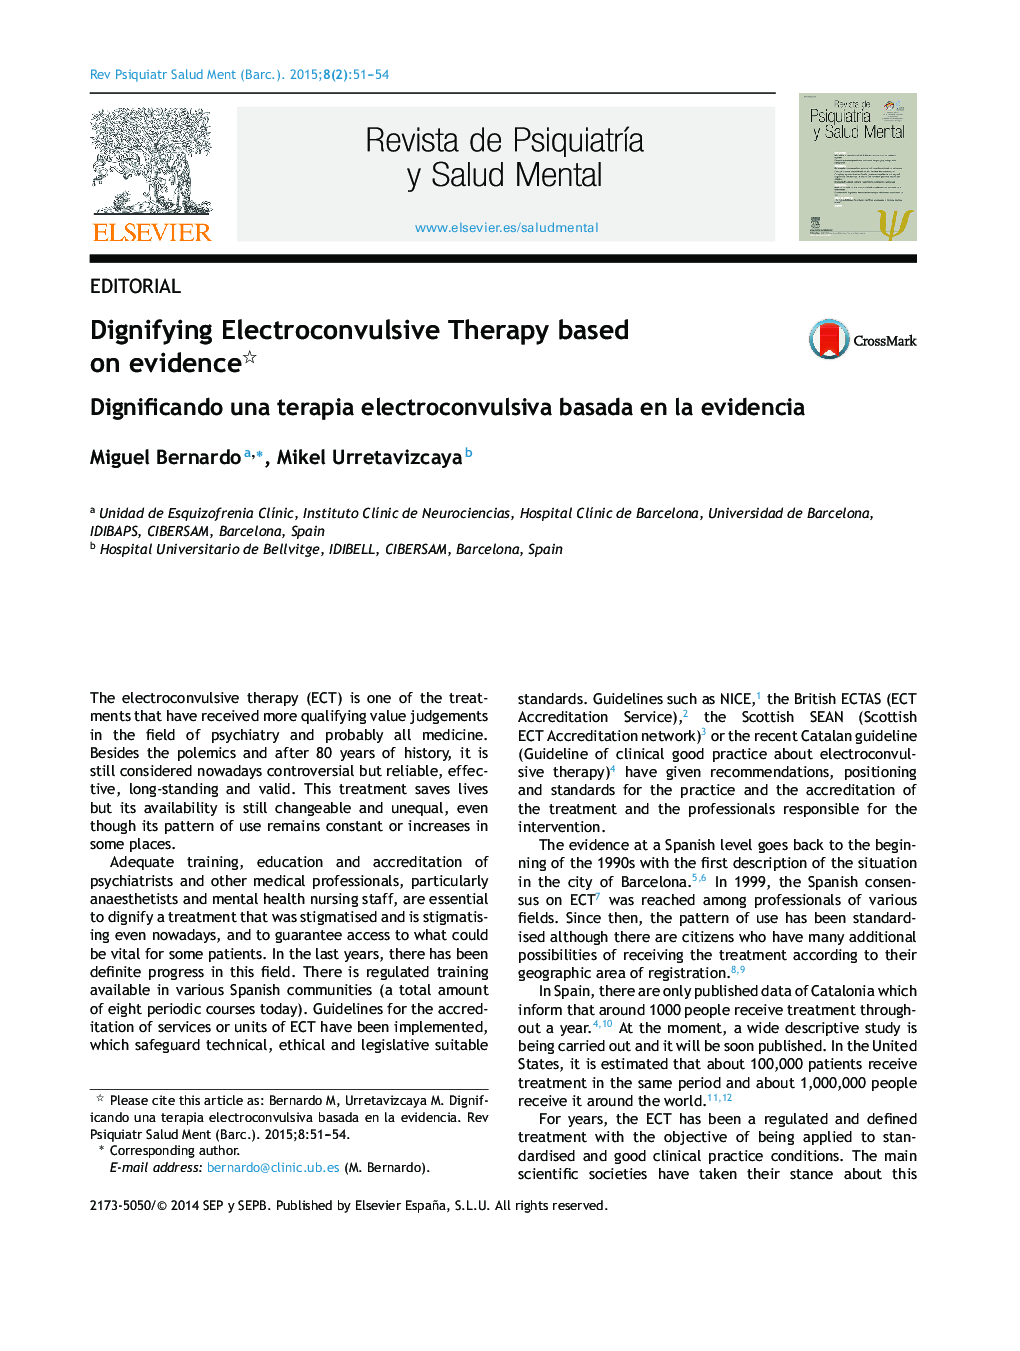 Dignifying Electroconvulsive Therapy based on evidence